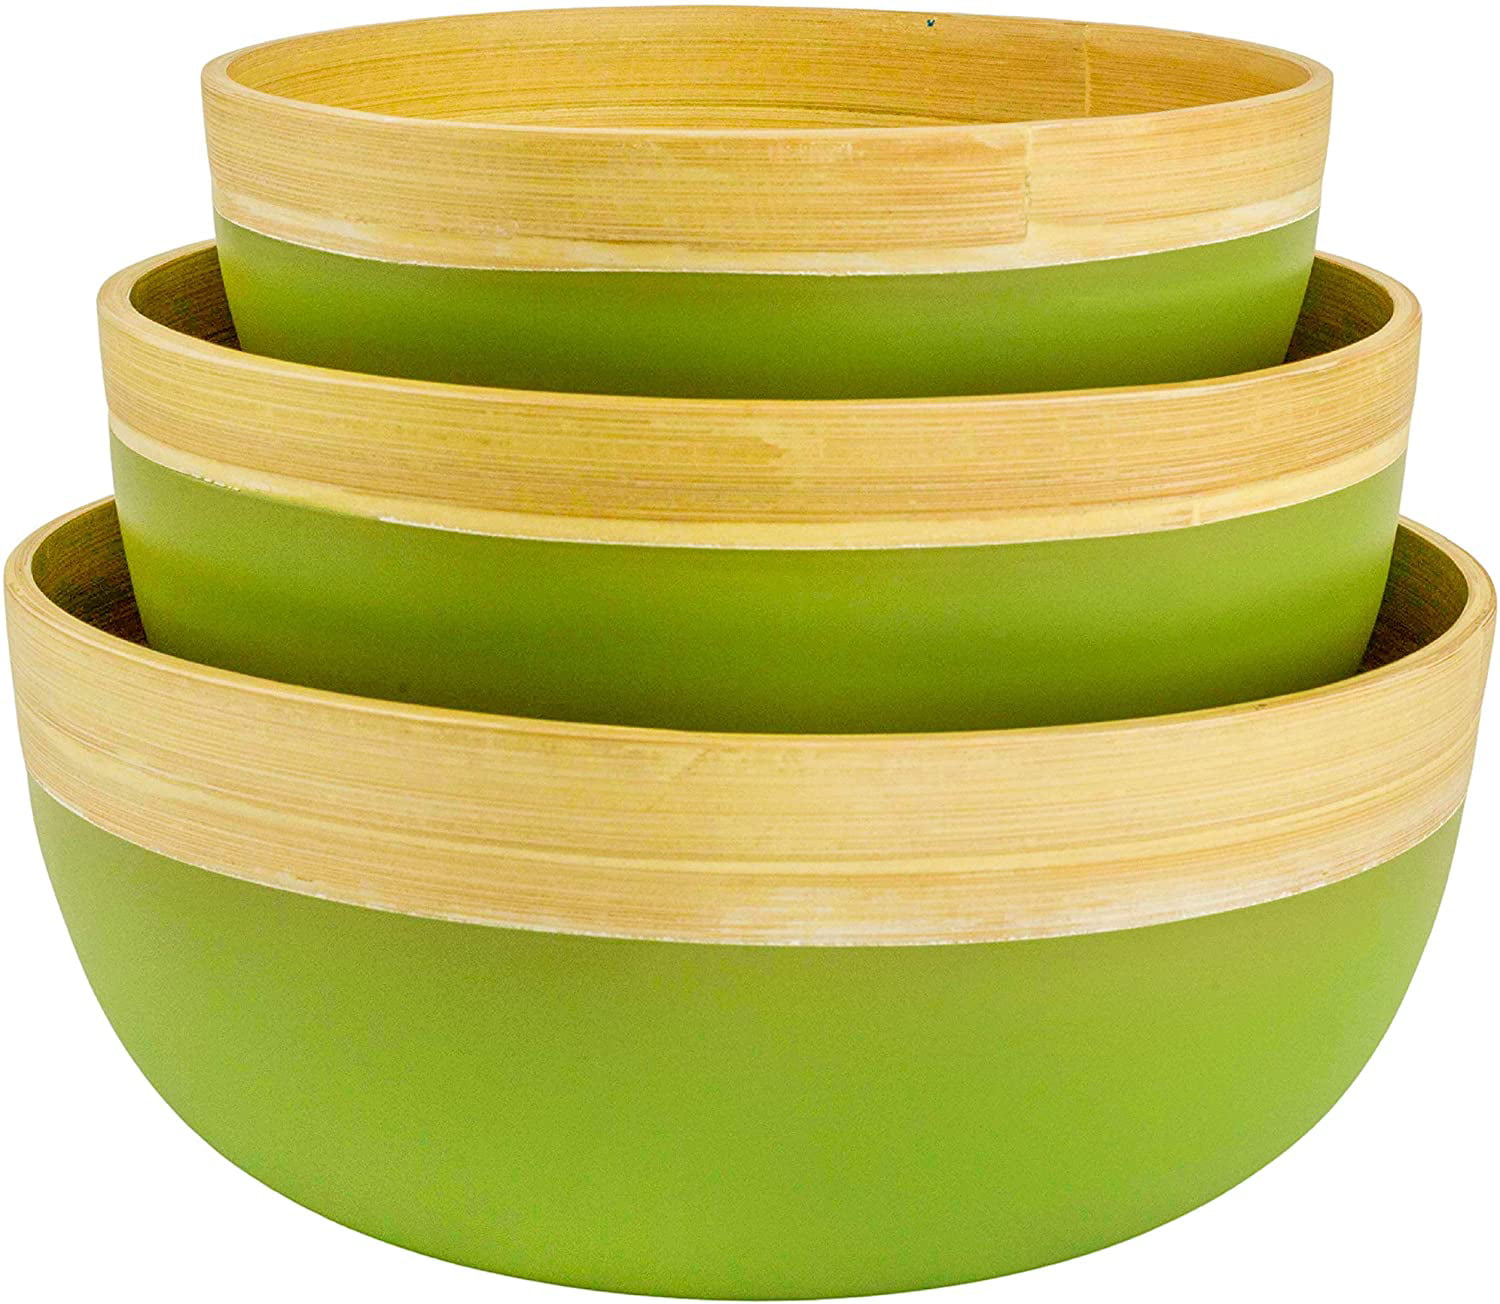 Matte Bamboo Natural Bamboo Large Salad Bowls Serving Bowl Sizes 54-81-114 OZ Small to Big Respectively for Serving Salad Pasta Fruit Chip Nut Cereal Bamboo Dinnerware Sets for Eating Decor Kid Bowl